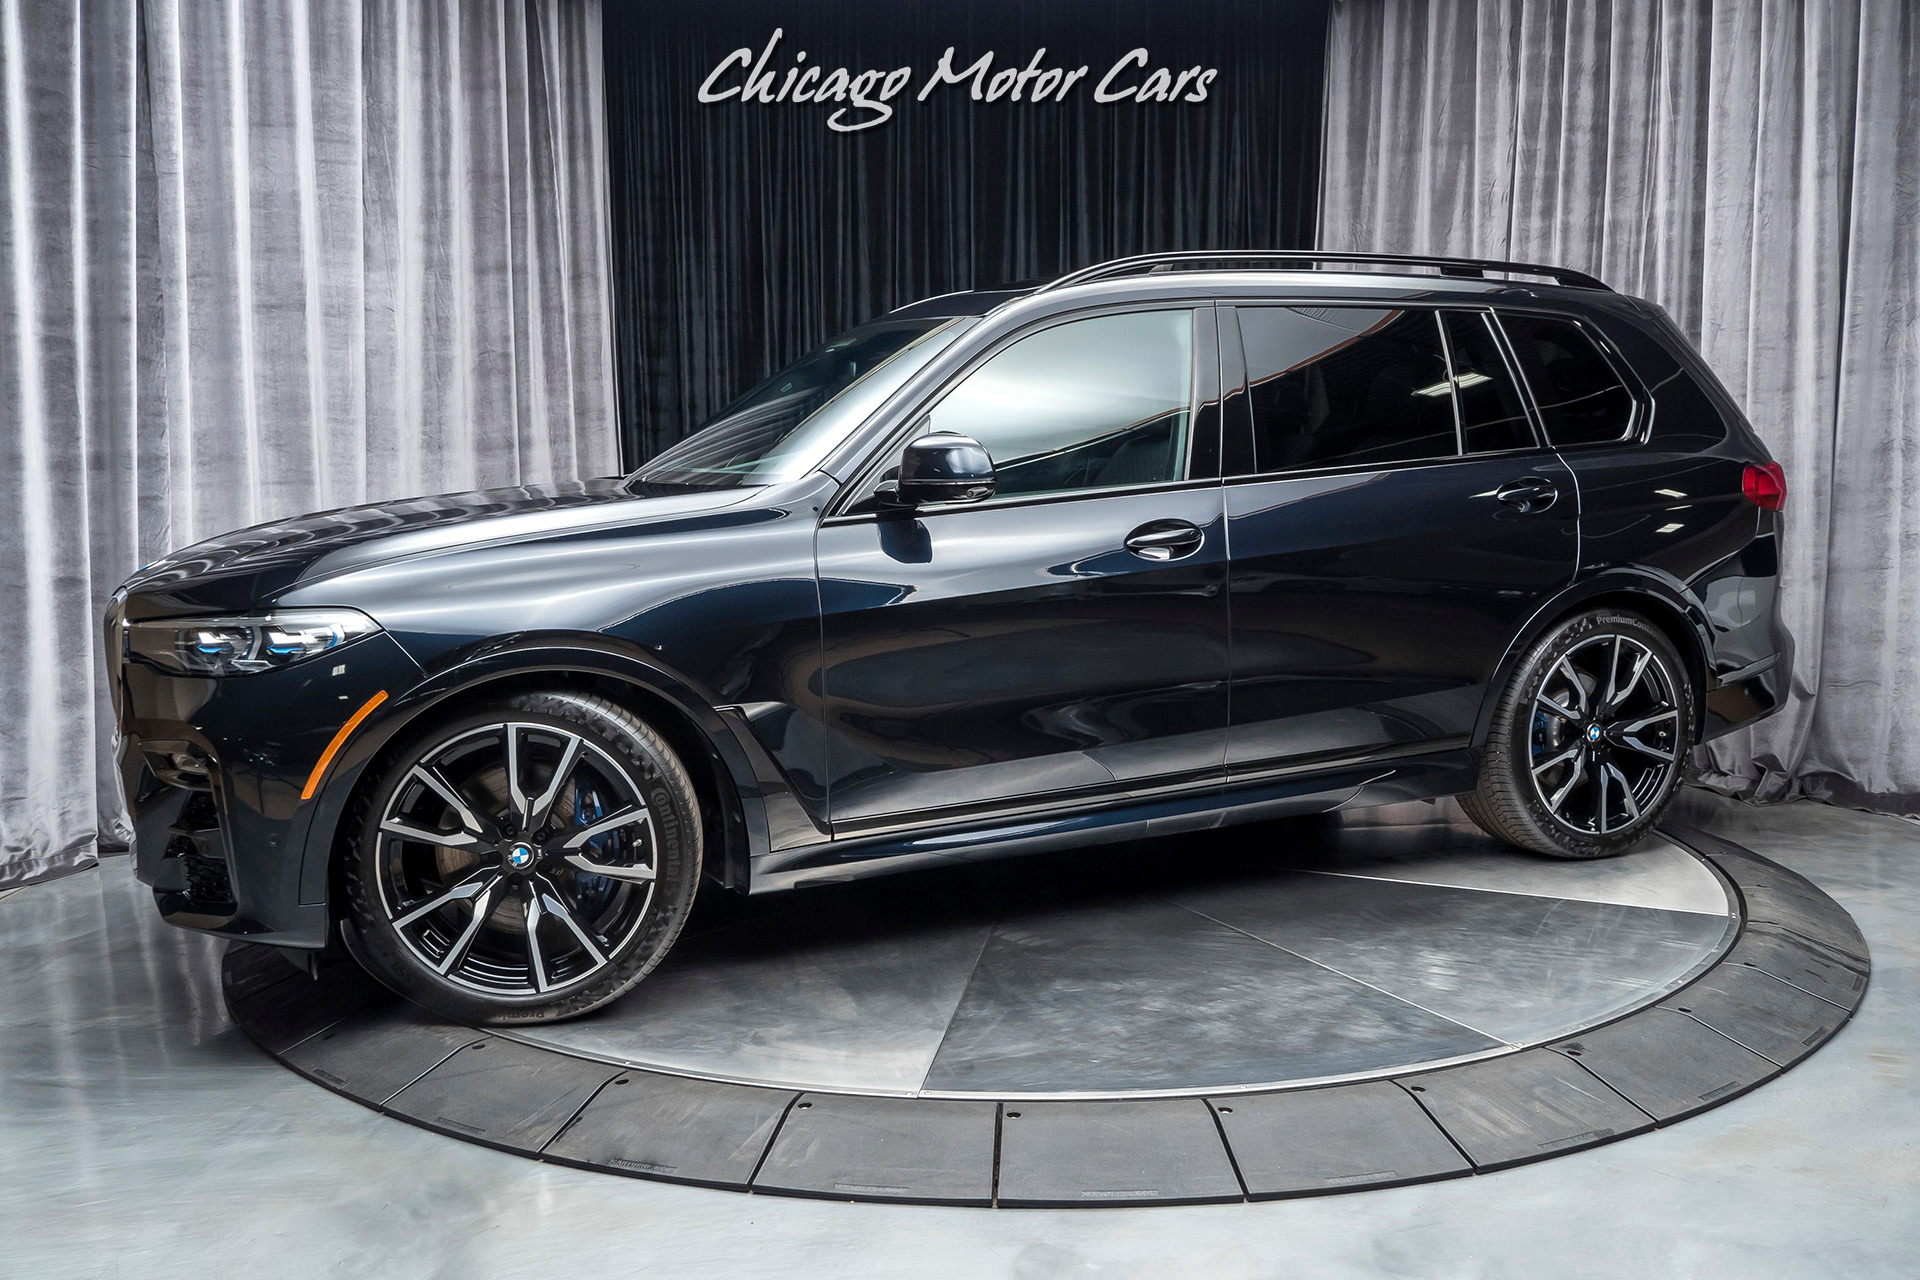 Used-2019-BMW-X7-xDrive50i-One-Owner-Only-2K-Miles-116K-LIST